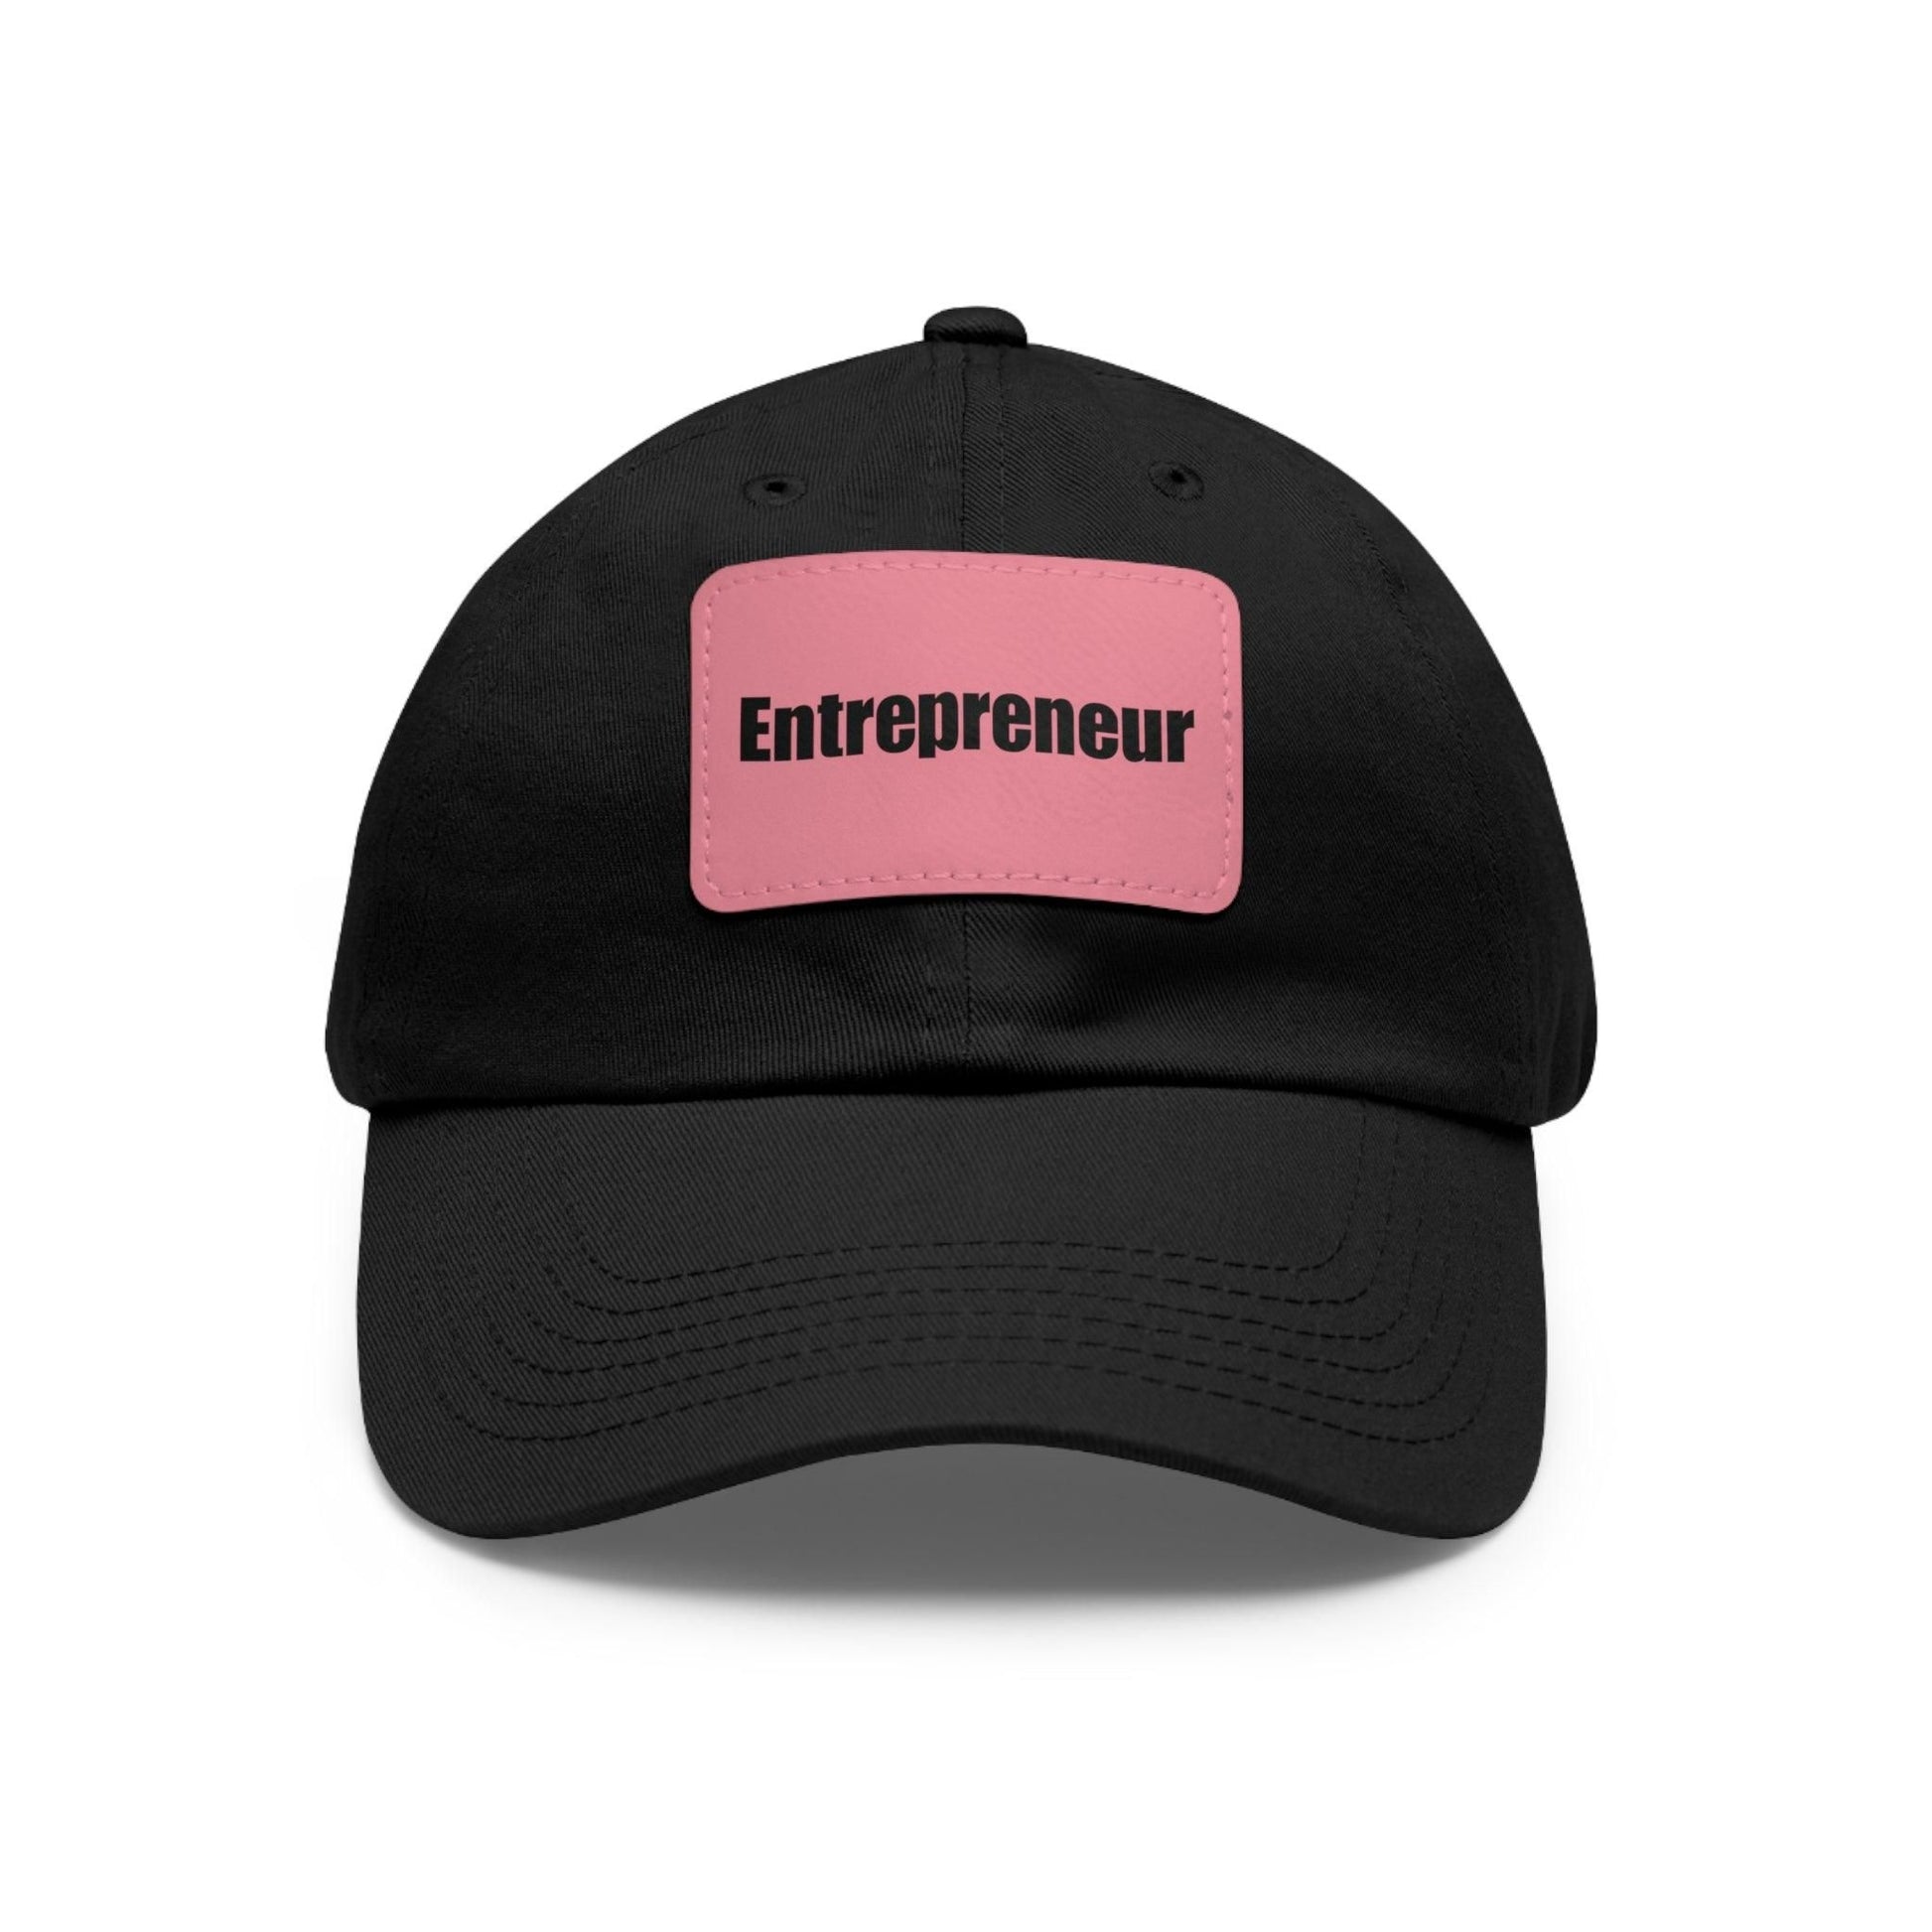 Entrepreneur Baseball Hat with Leather Patch Cap Black / Pink patch Rectangle One size